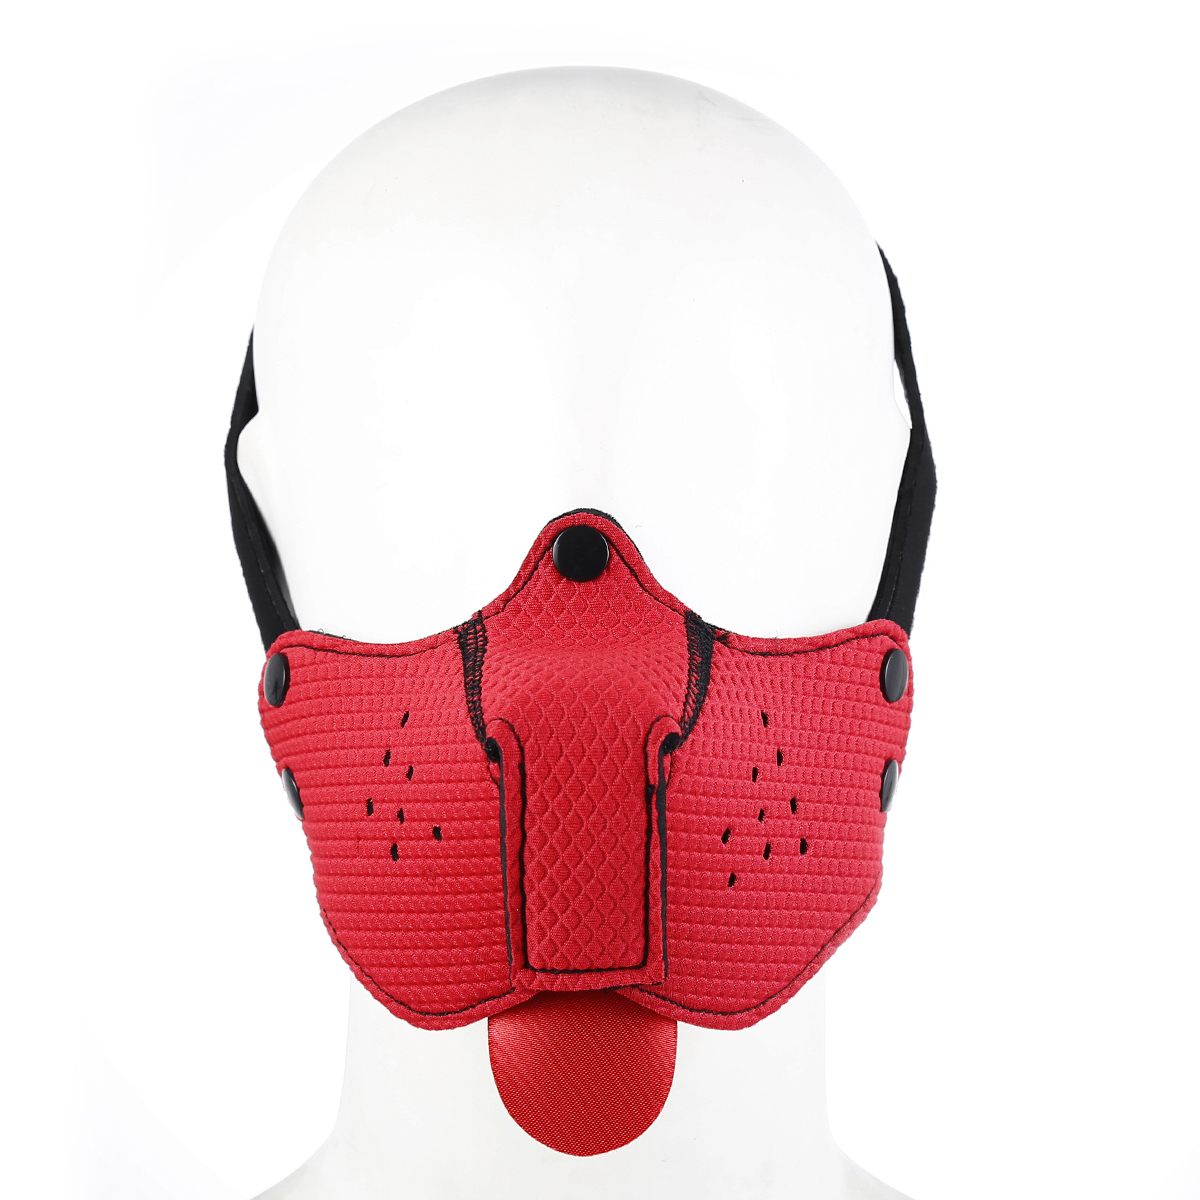 Neoprene-Puppy-Dog-Red-Mouth-Mask-OPR-321074-1